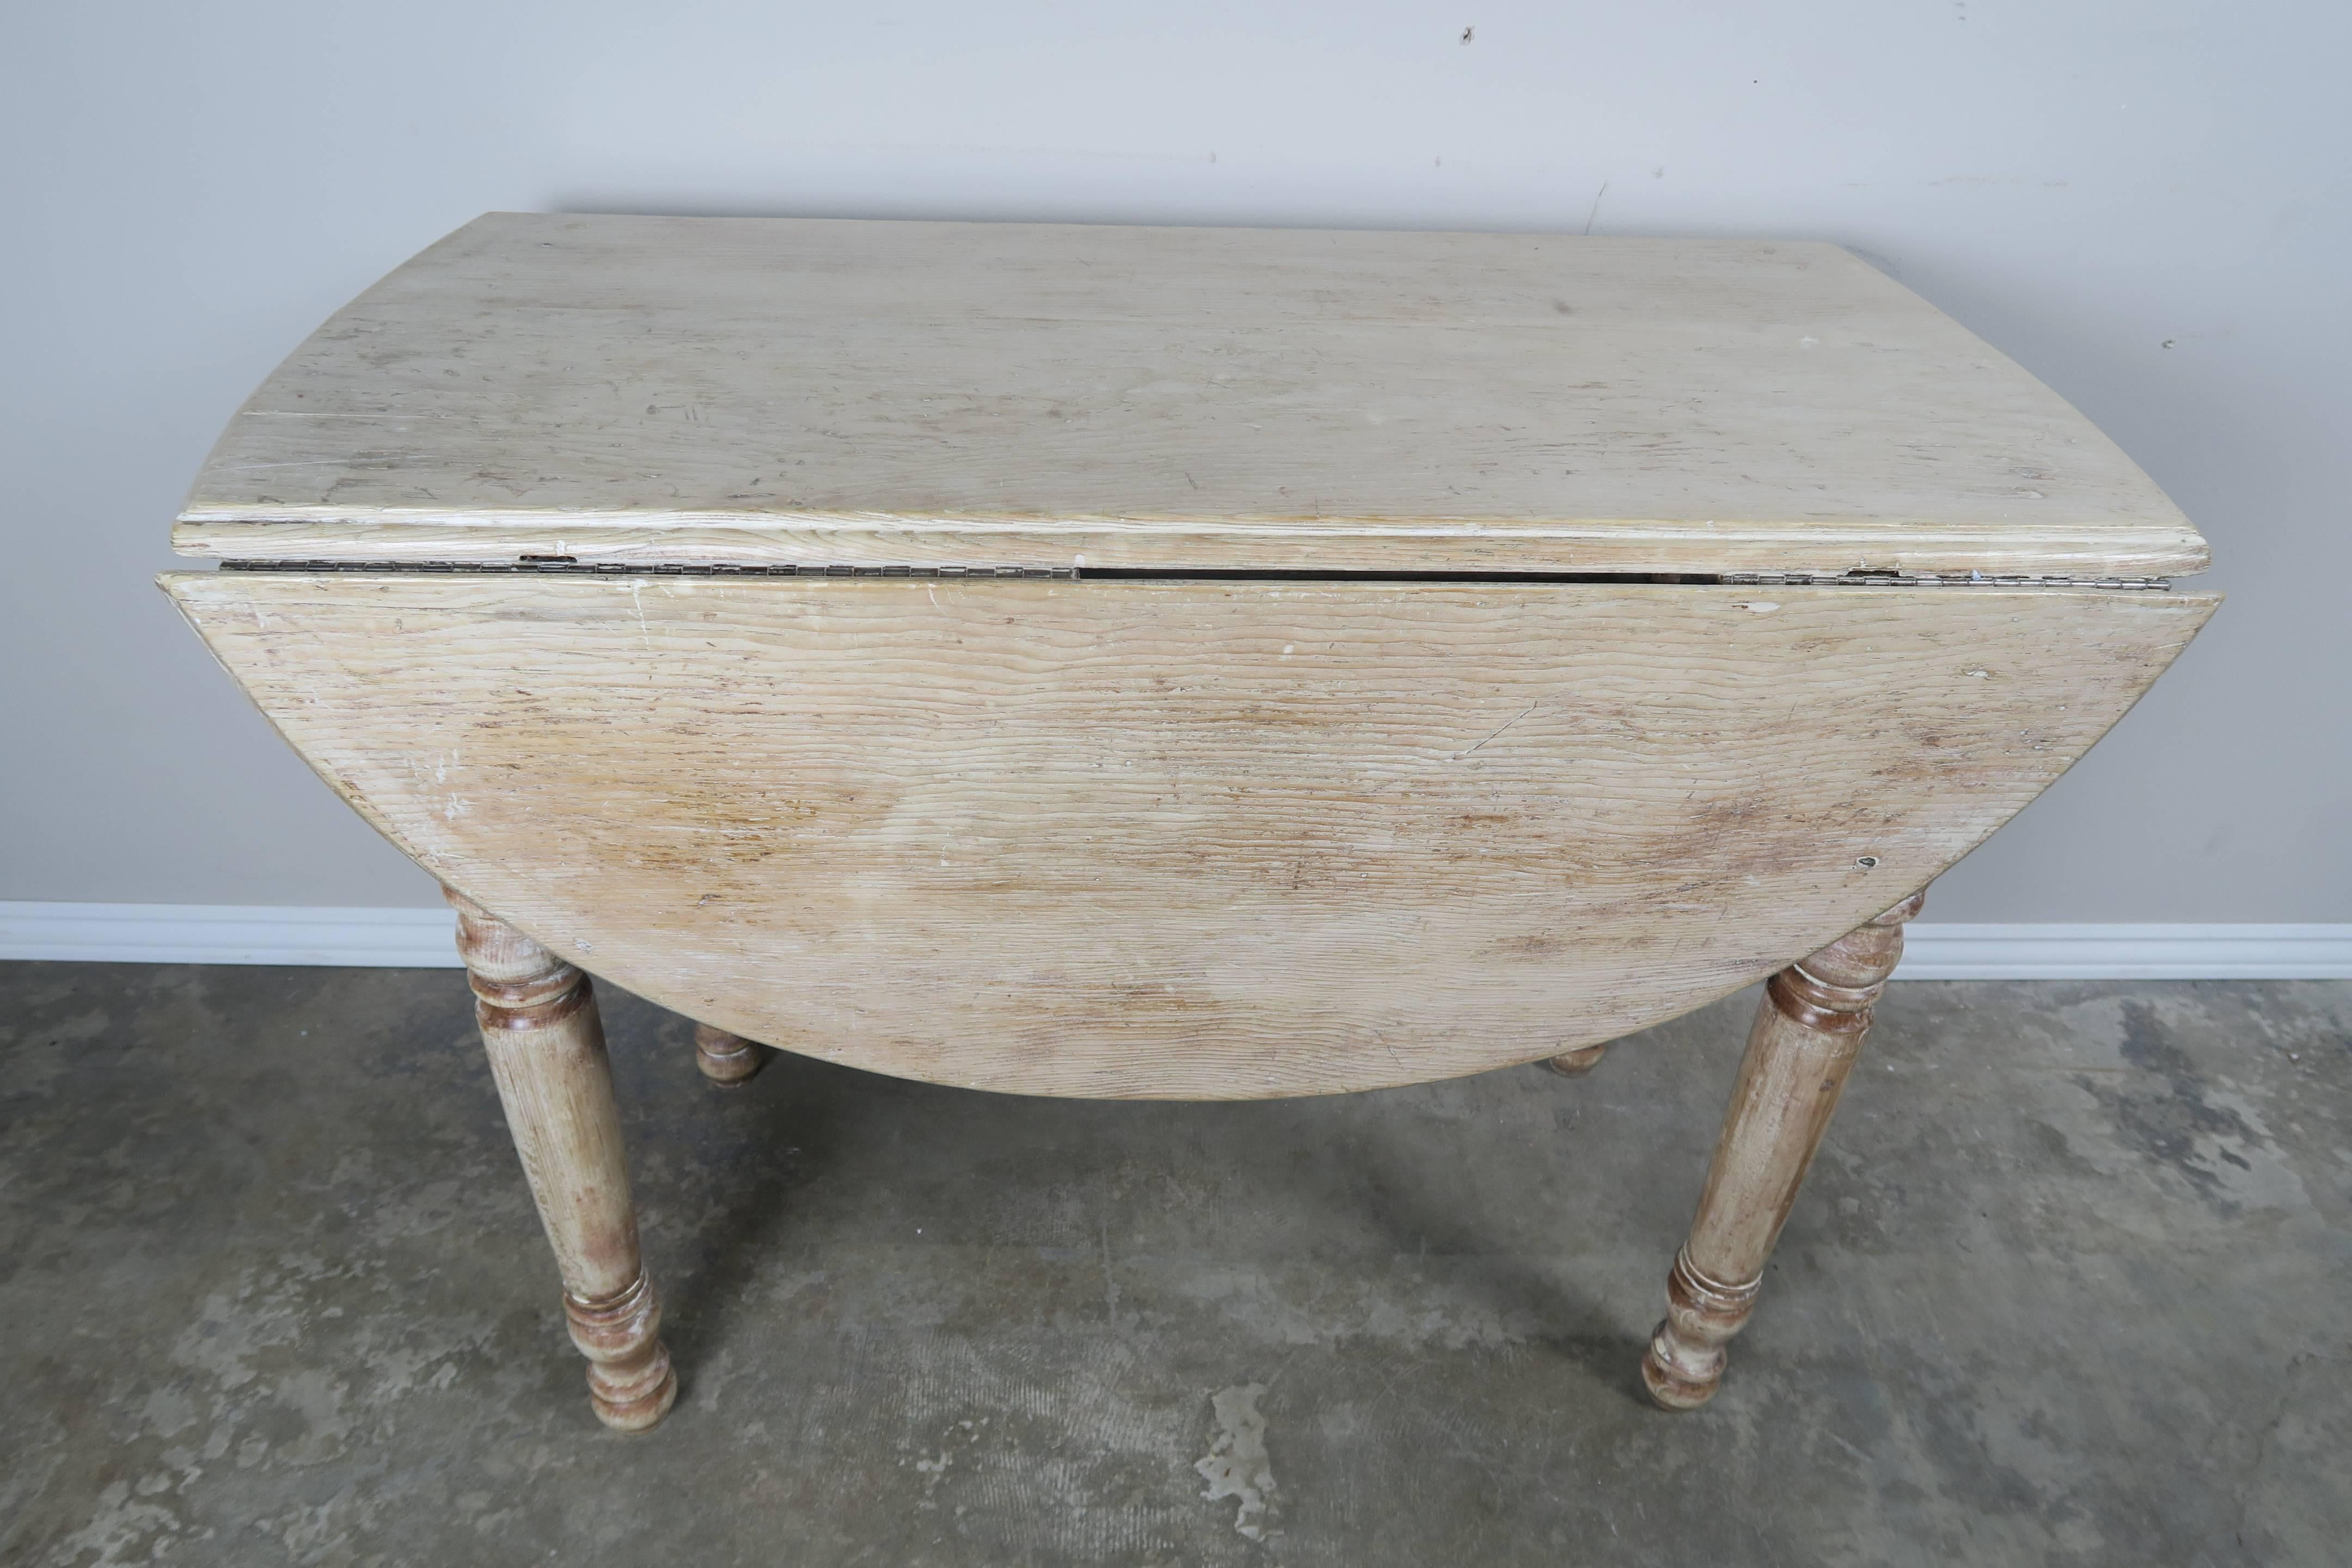 Rustic English Drop-Leaf Table with Natural Washed Finish